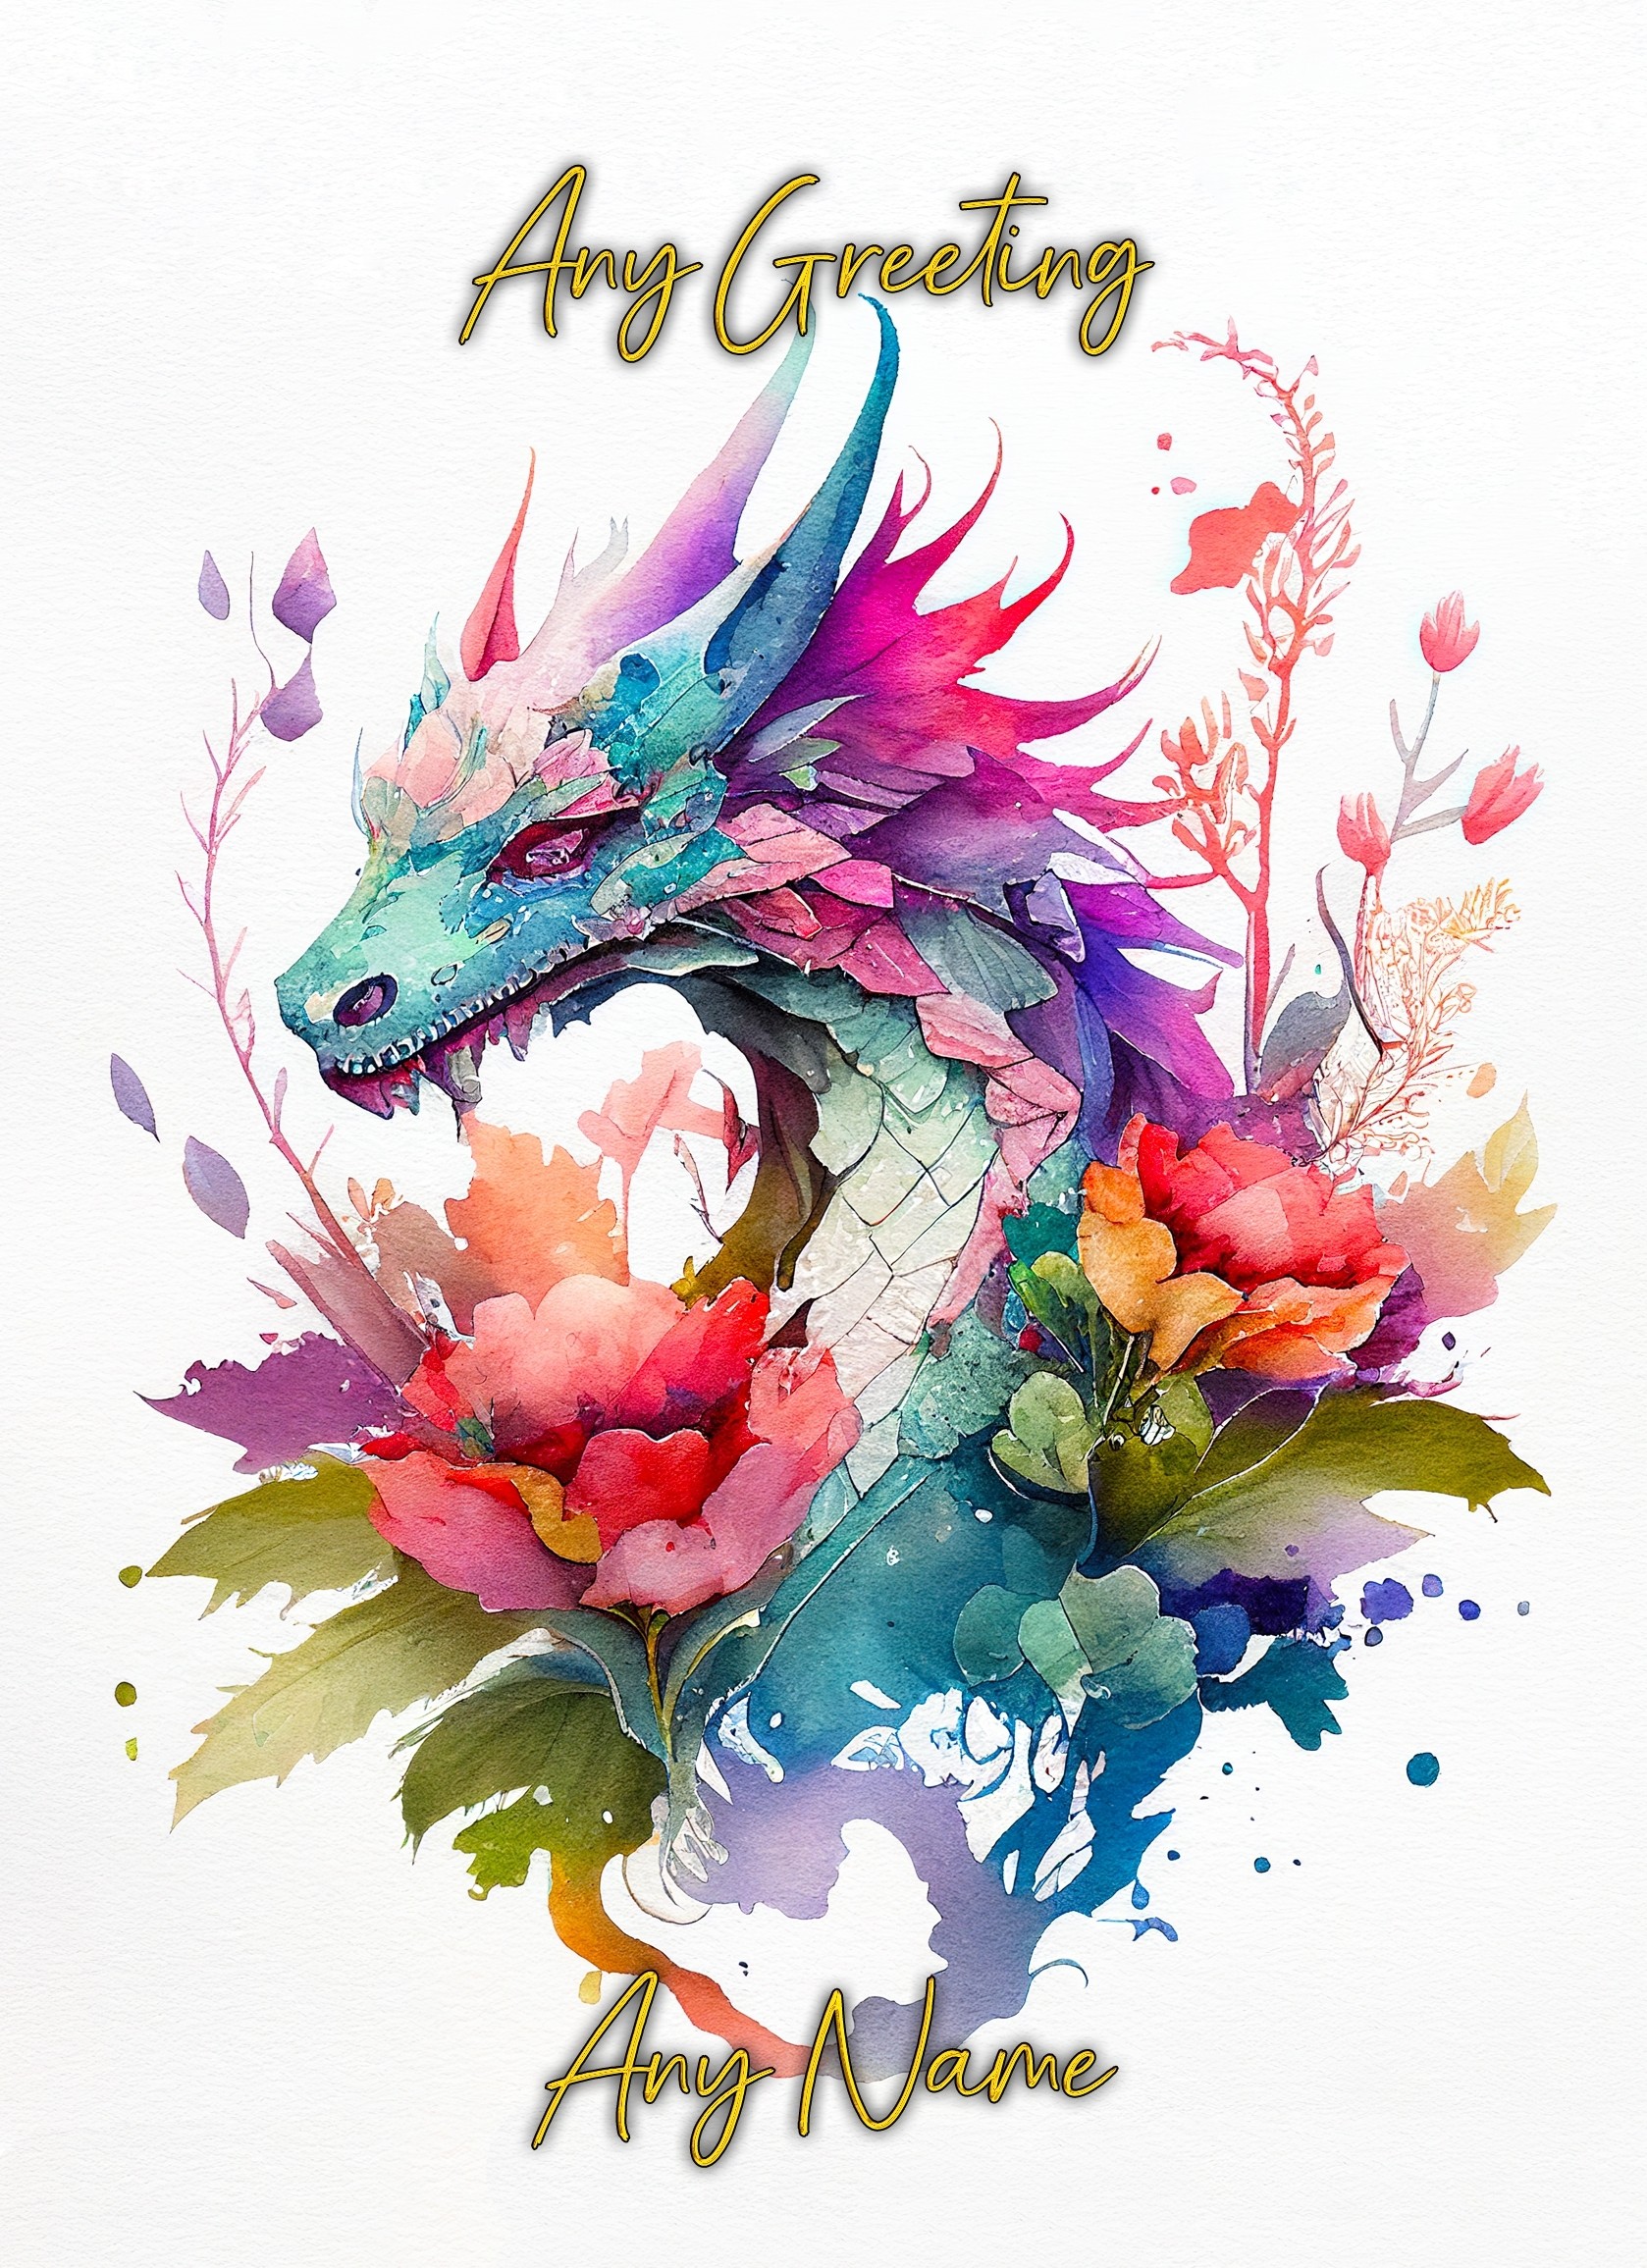 Personalised Dragon Watercolour Art Fantasy Greeting Card (Birthday, Fathers Day, Any Occasion)